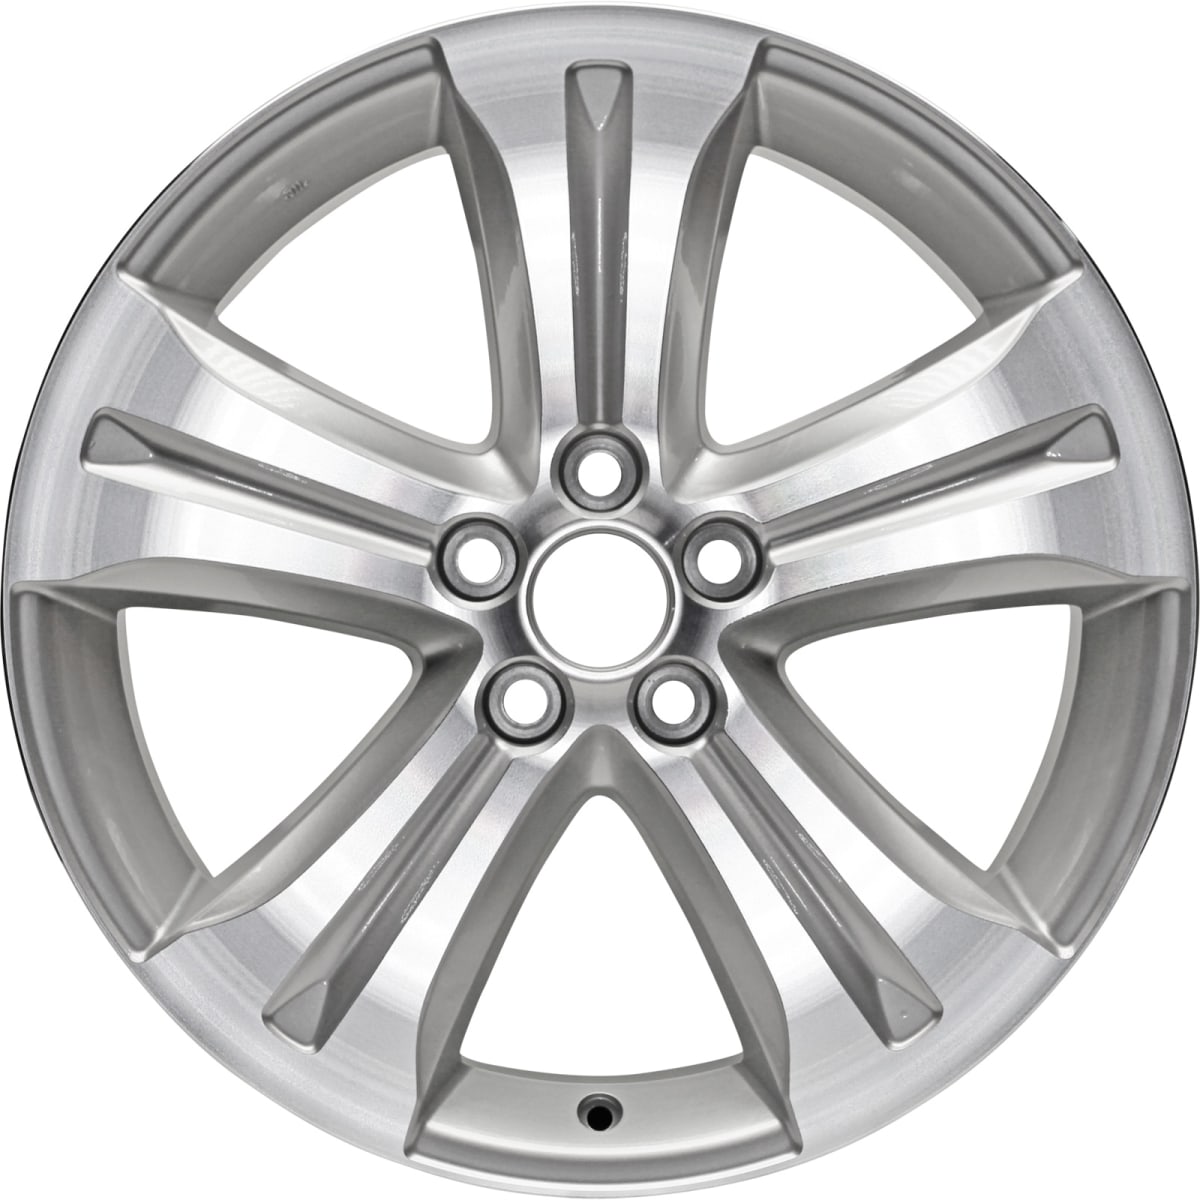 AutoWheels® ALY69536U10N Jante Wheel, Aluminum, Silver, 19 in. x 7.5 in., Sold Individually